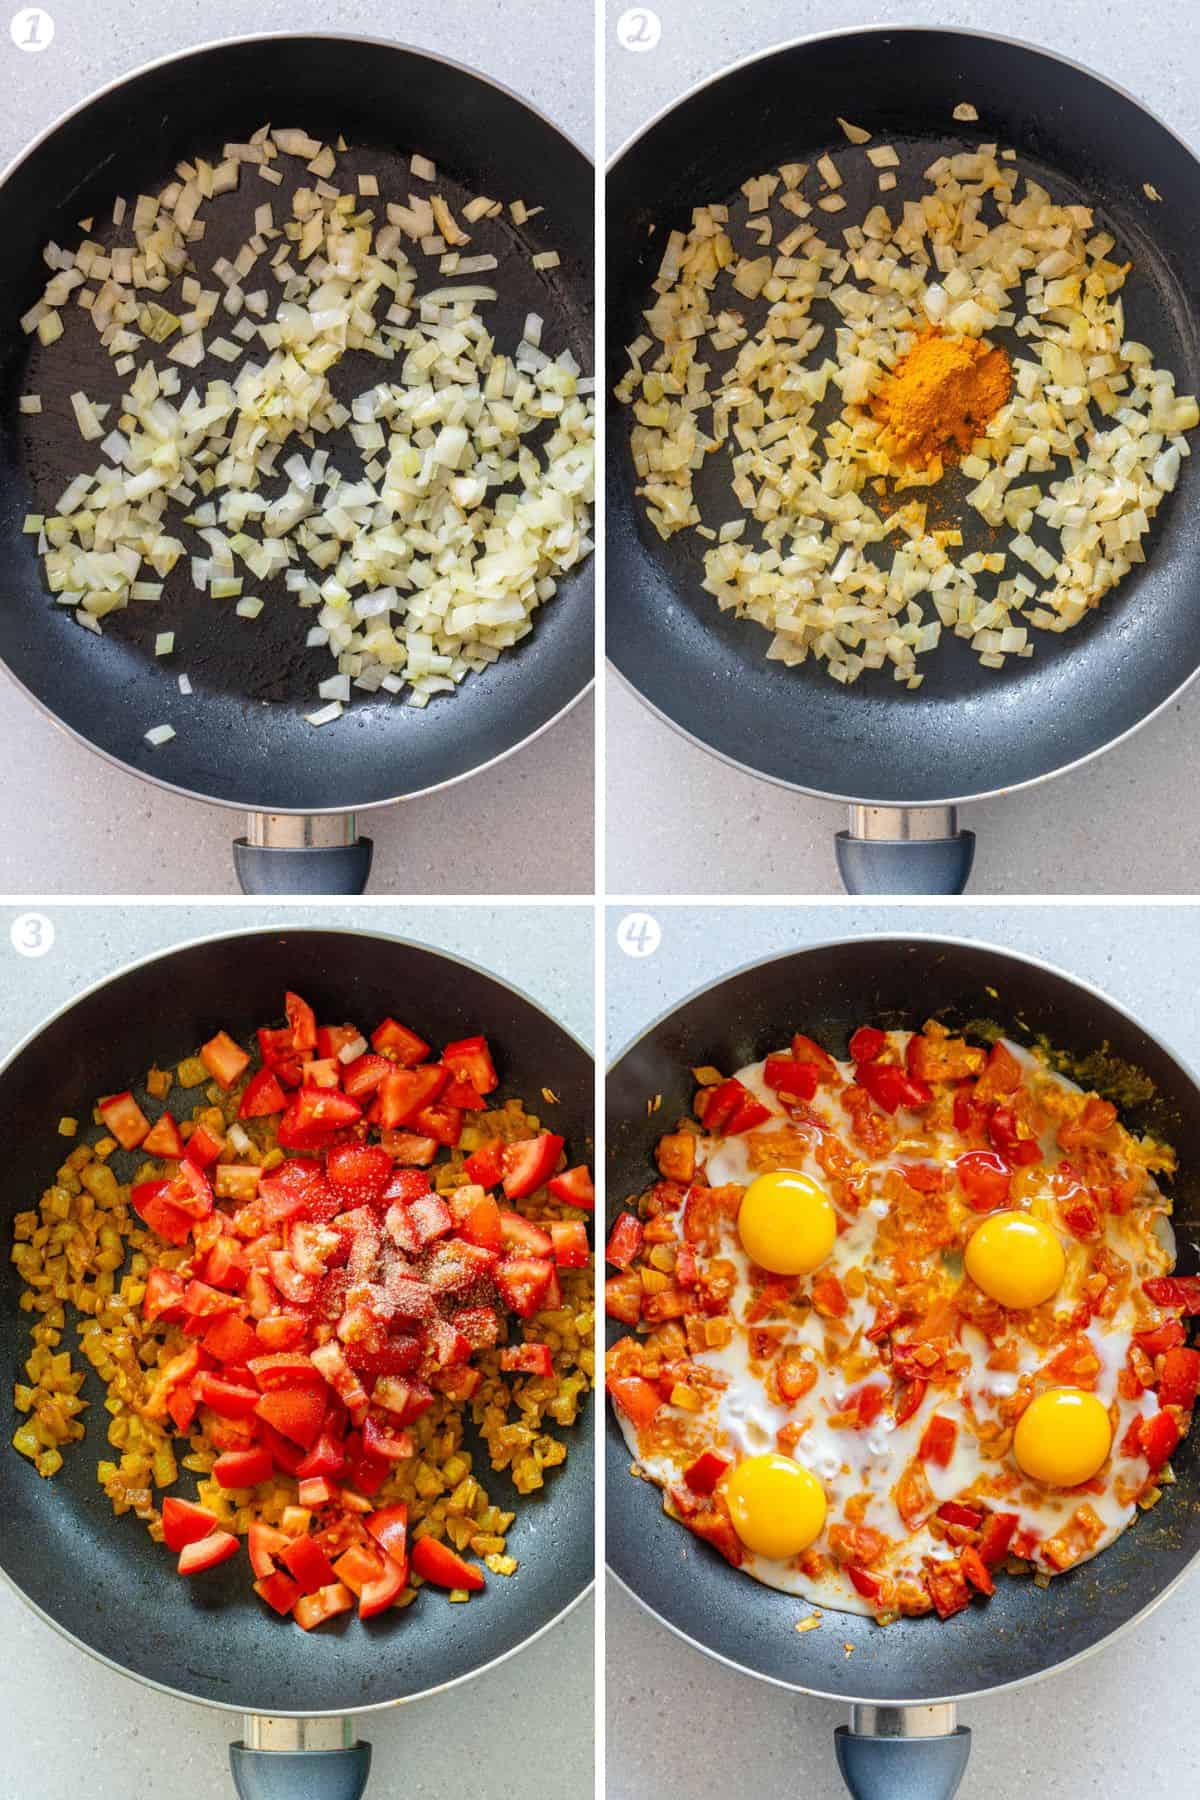 Steps on how to make a Persian Omelette